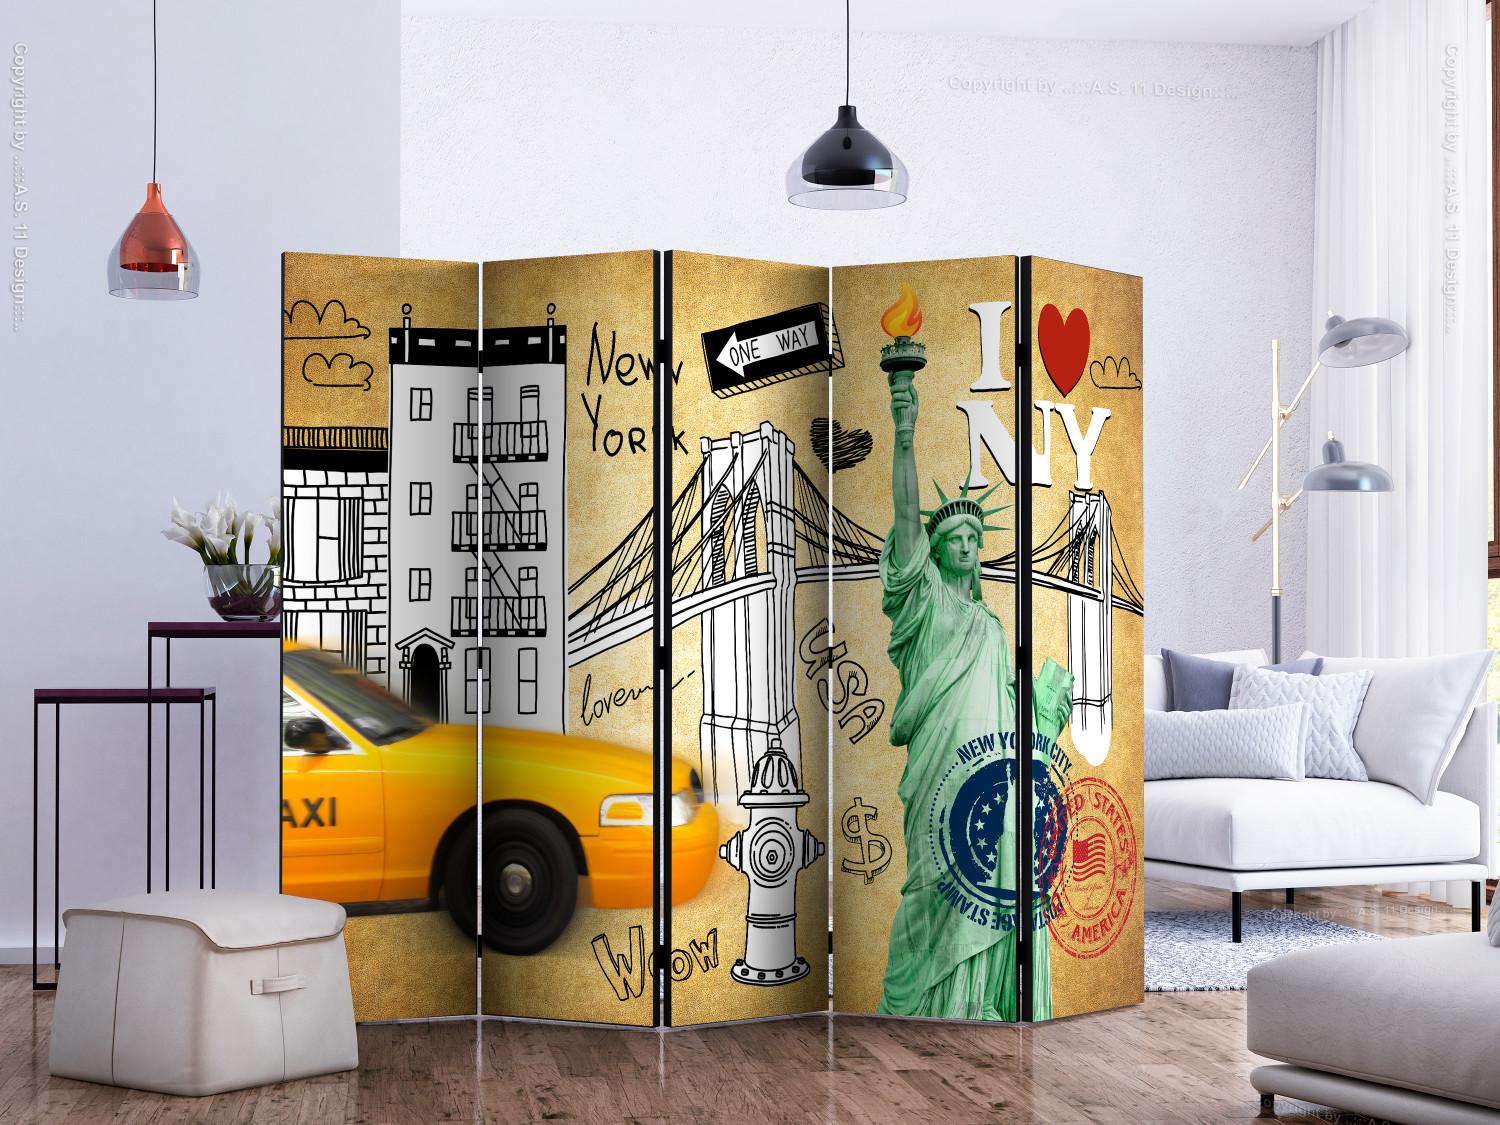 Room Divider One Way - New York II - yellow car and signs on a creative pattern